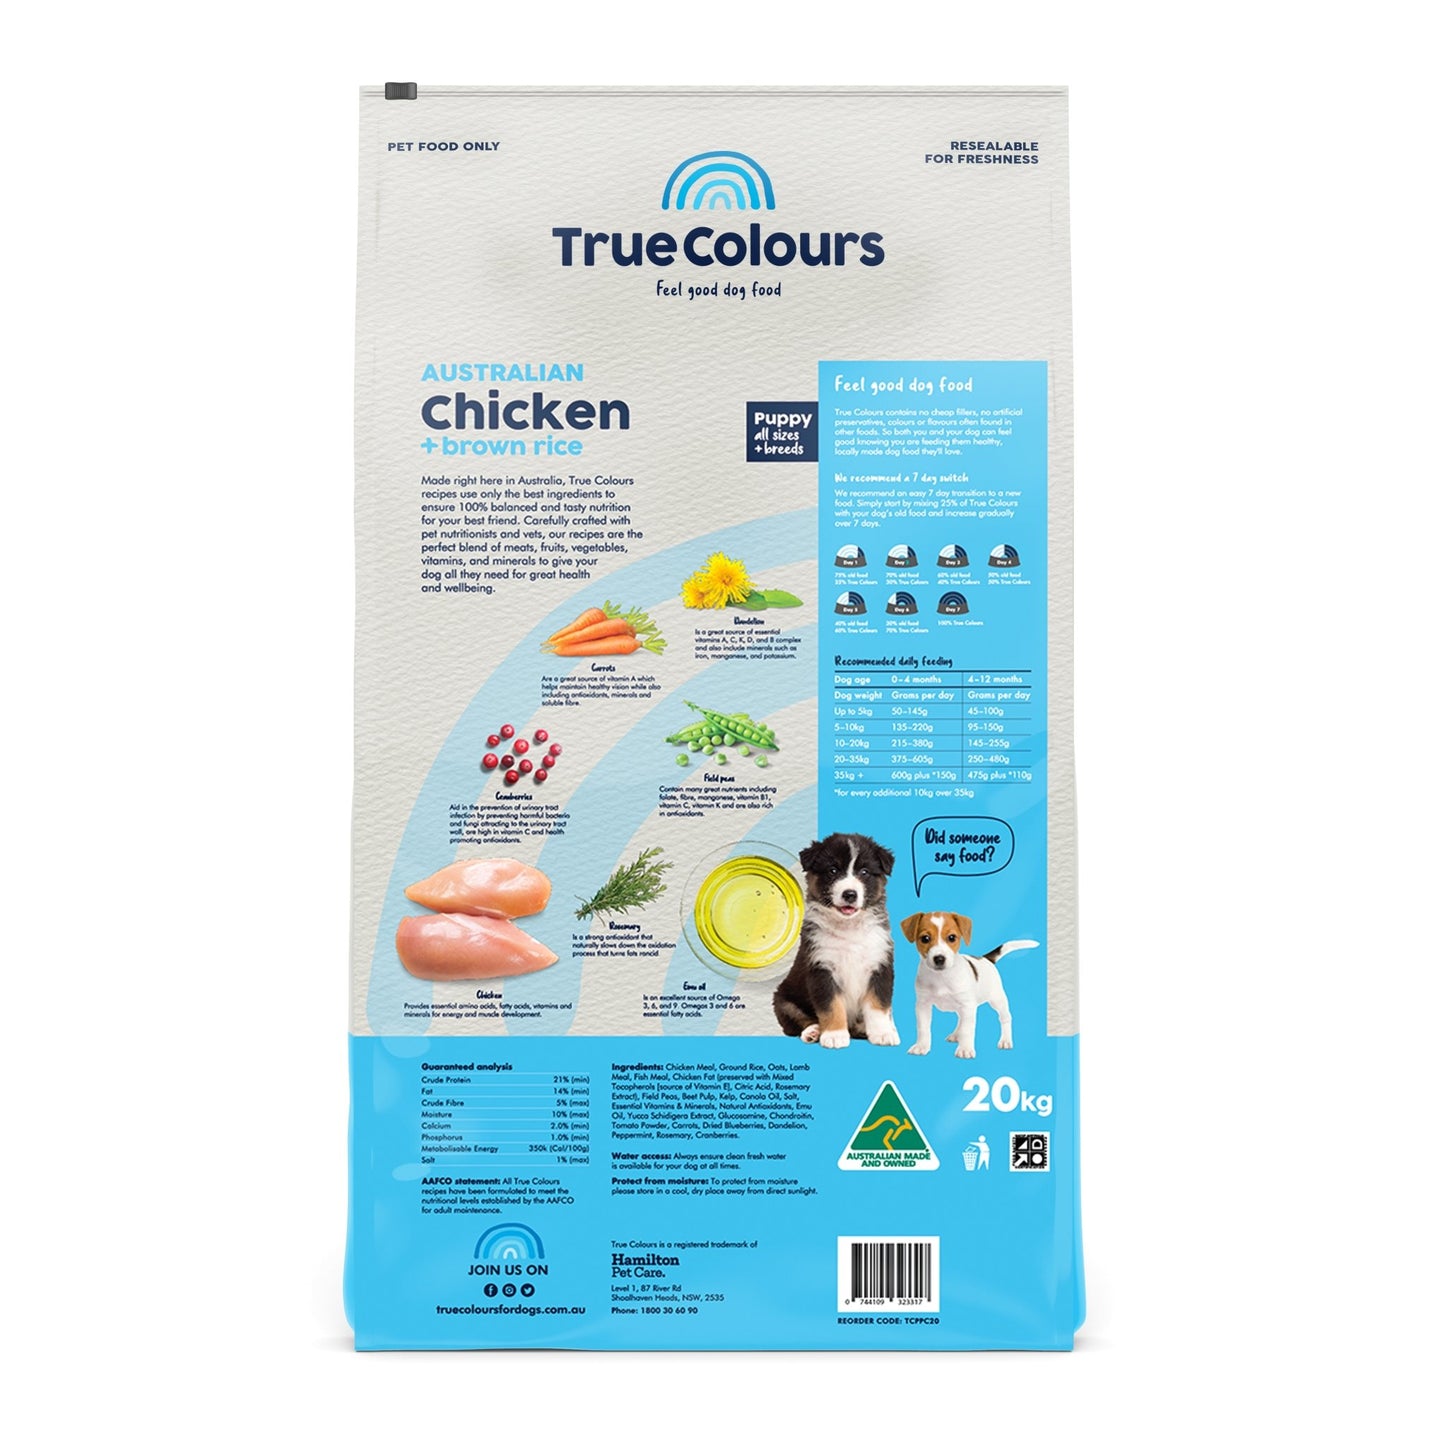 True Colours Dry Dog Food Puppy Chicken and Brown Rice - Woonona Petfood & Produce